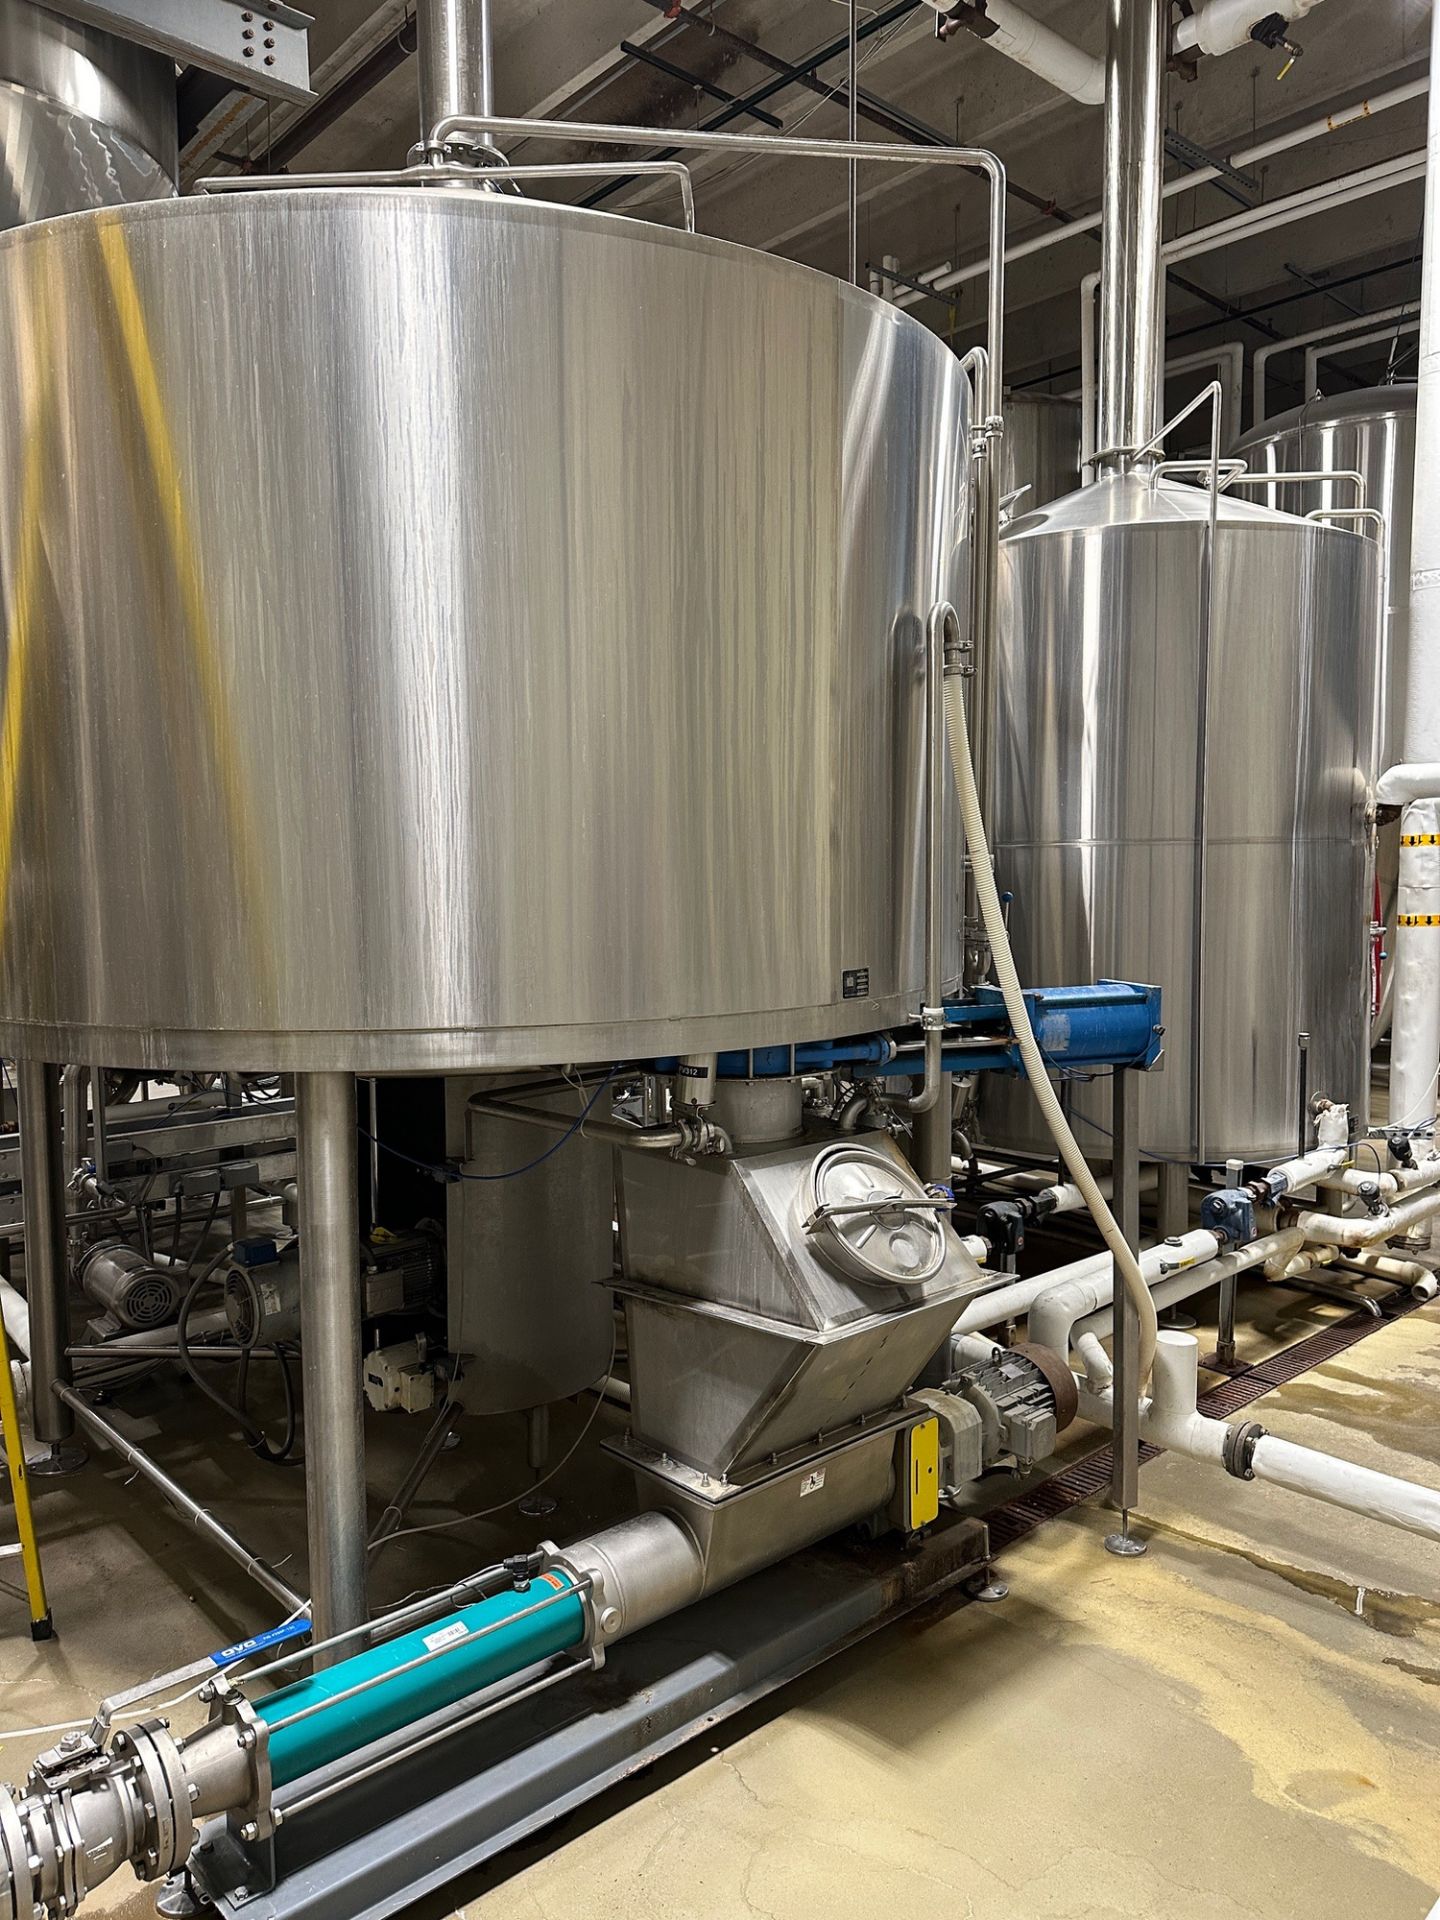 Newlands 4-Vessel 40 BBL Stainless Steel Brewhouse - Mash Mixer (Approx. 7' Diamete | Rig Fee $8500 - Image 5 of 35